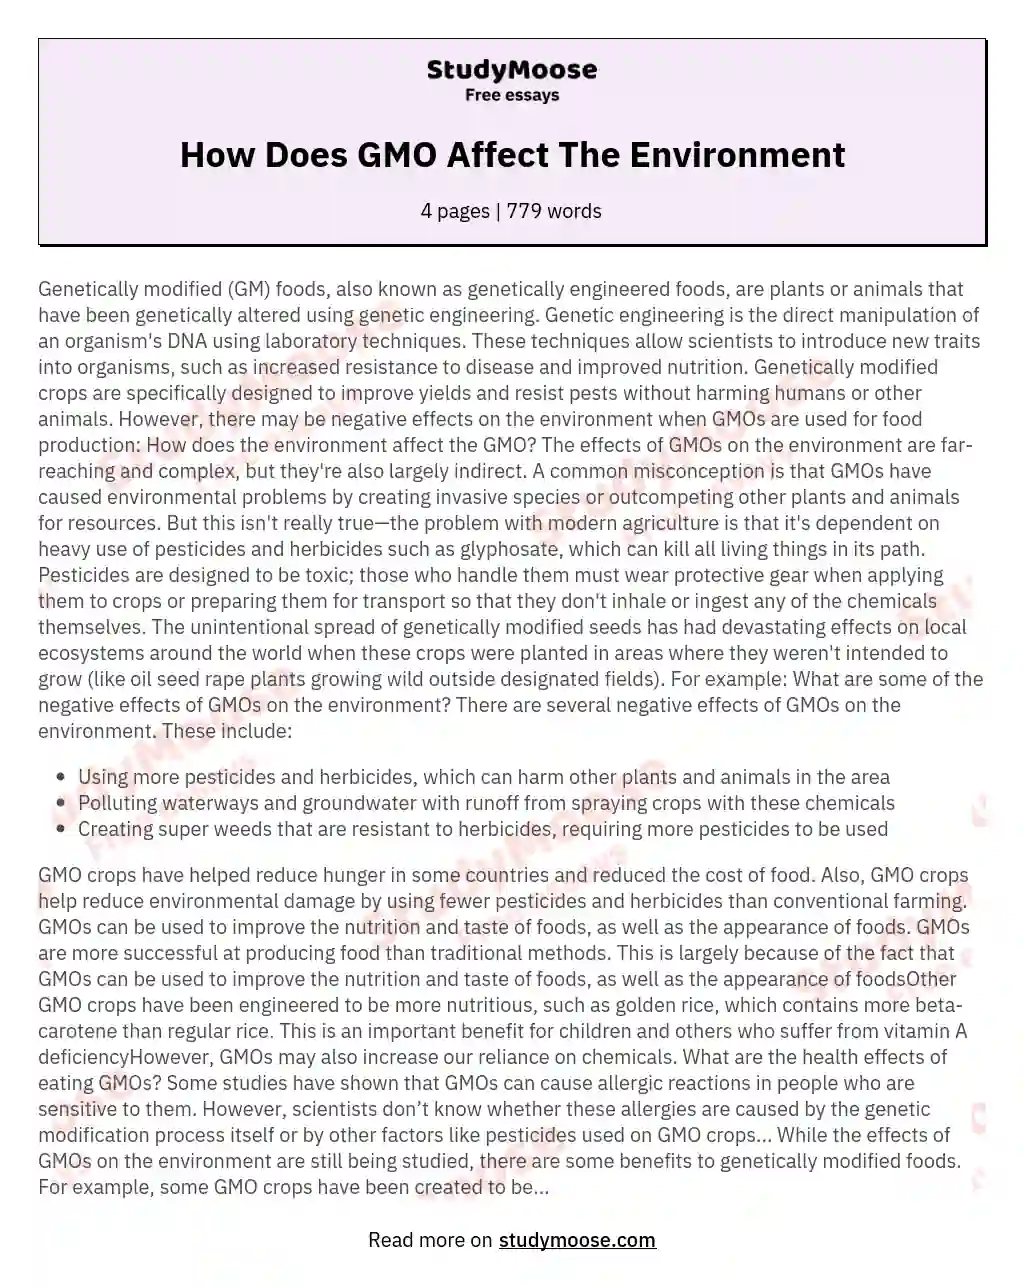 How Does GMO Affect The Environment essay